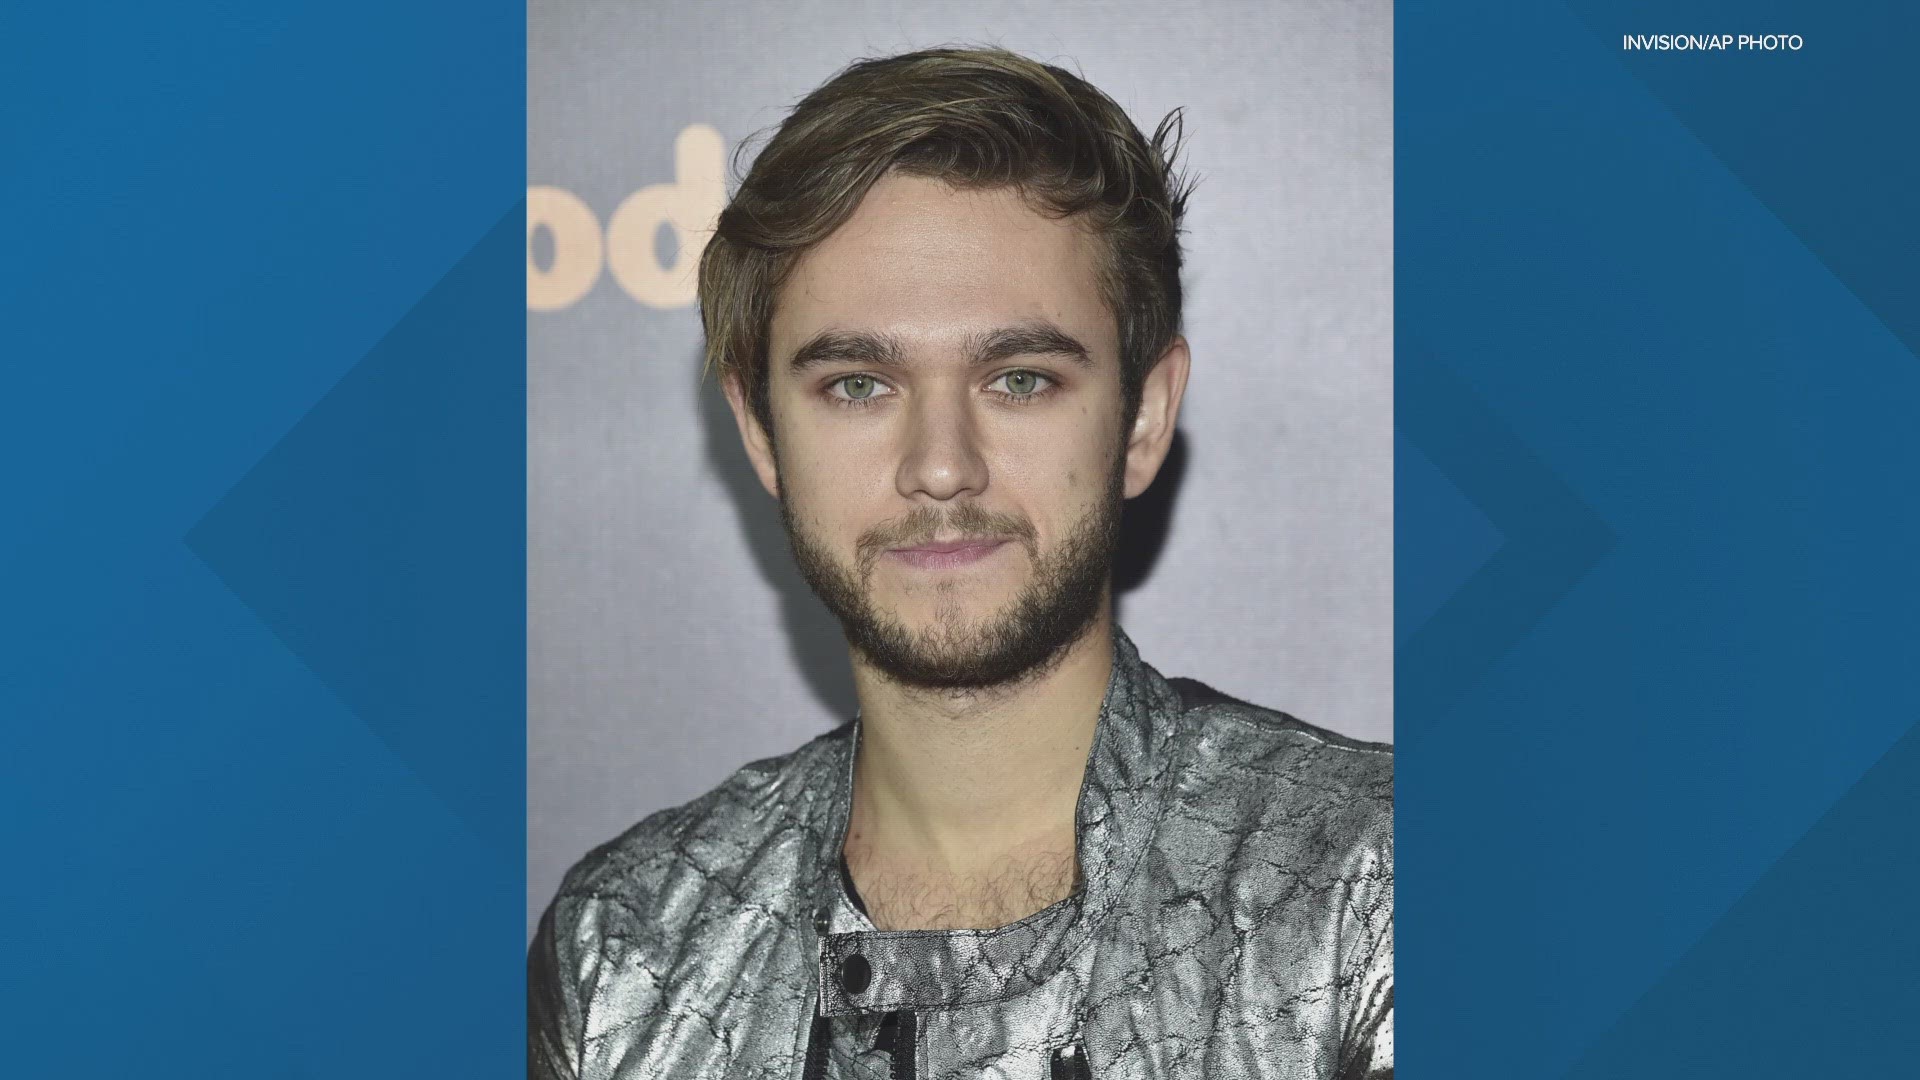 Tickets are on sale now to see Grammy Award-winning DJ Zedd for the NBA Crossover Concert Series on Feb. 16.